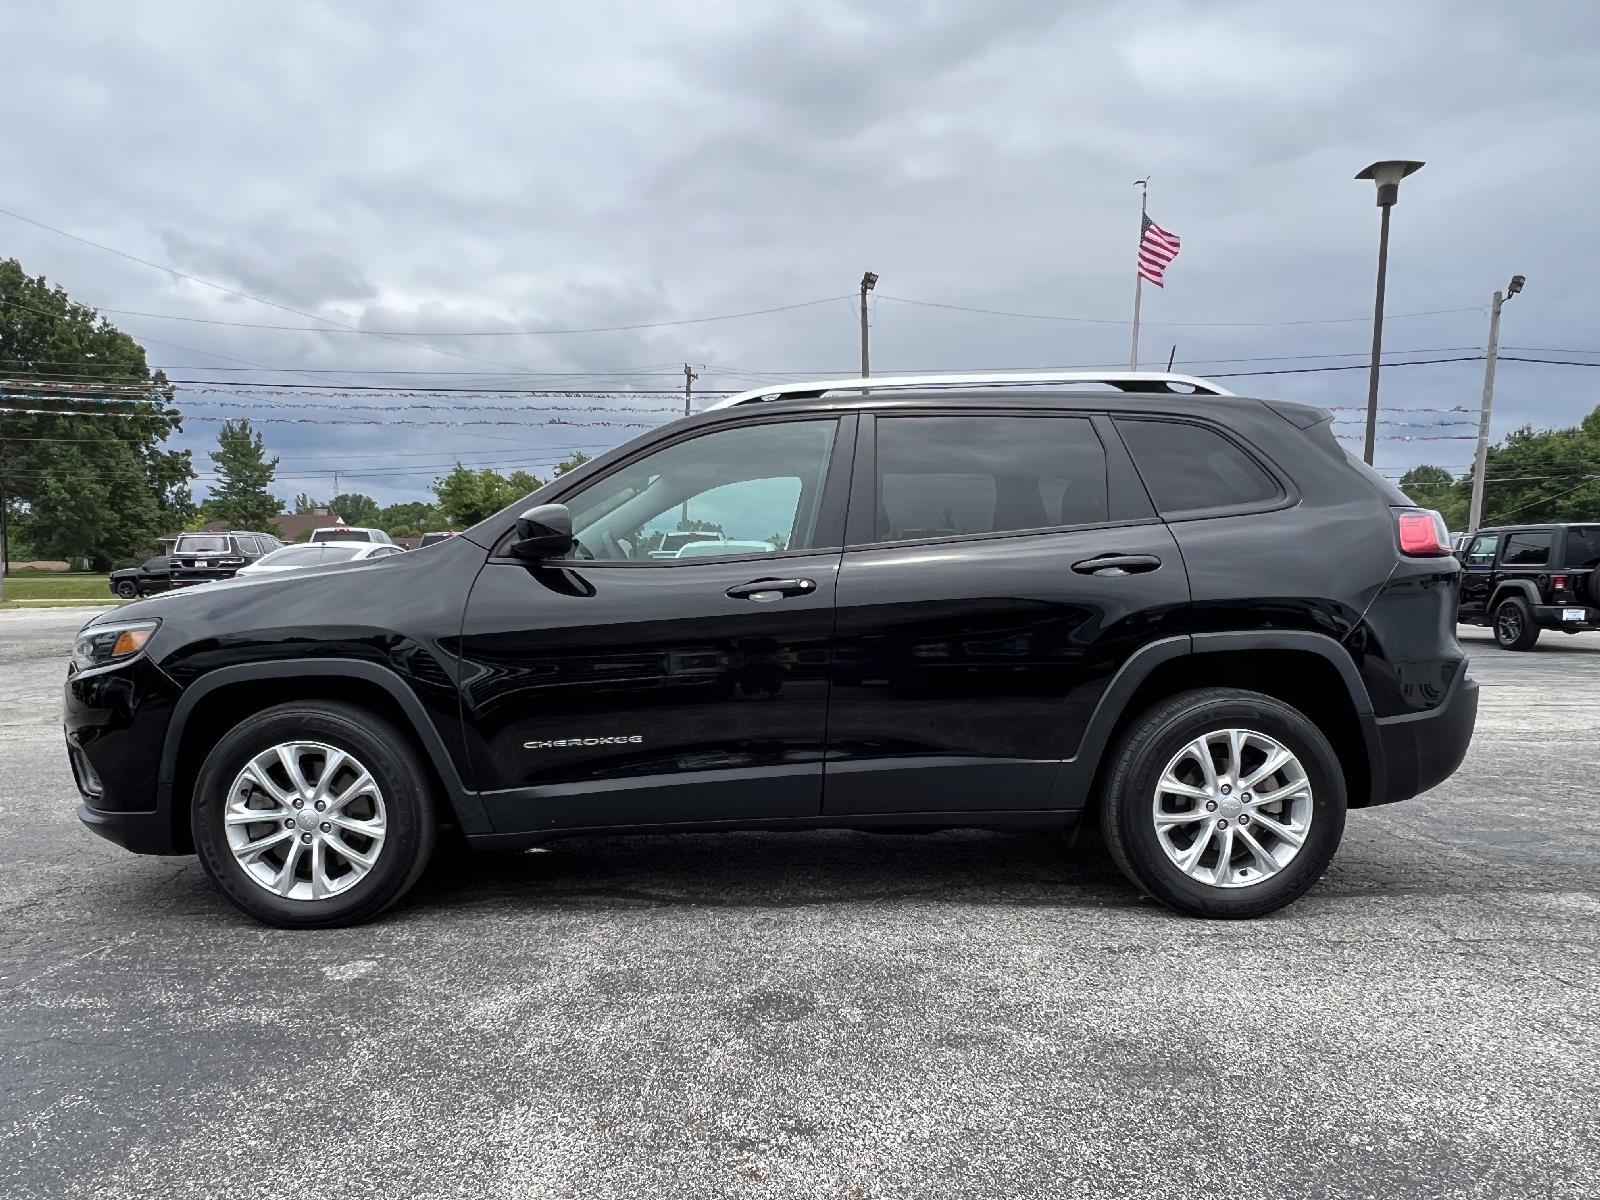 Used 2020 Jeep Cherokee Latitude with VIN 1C4PJLCB8LD535777 for sale in North Vernon, IN